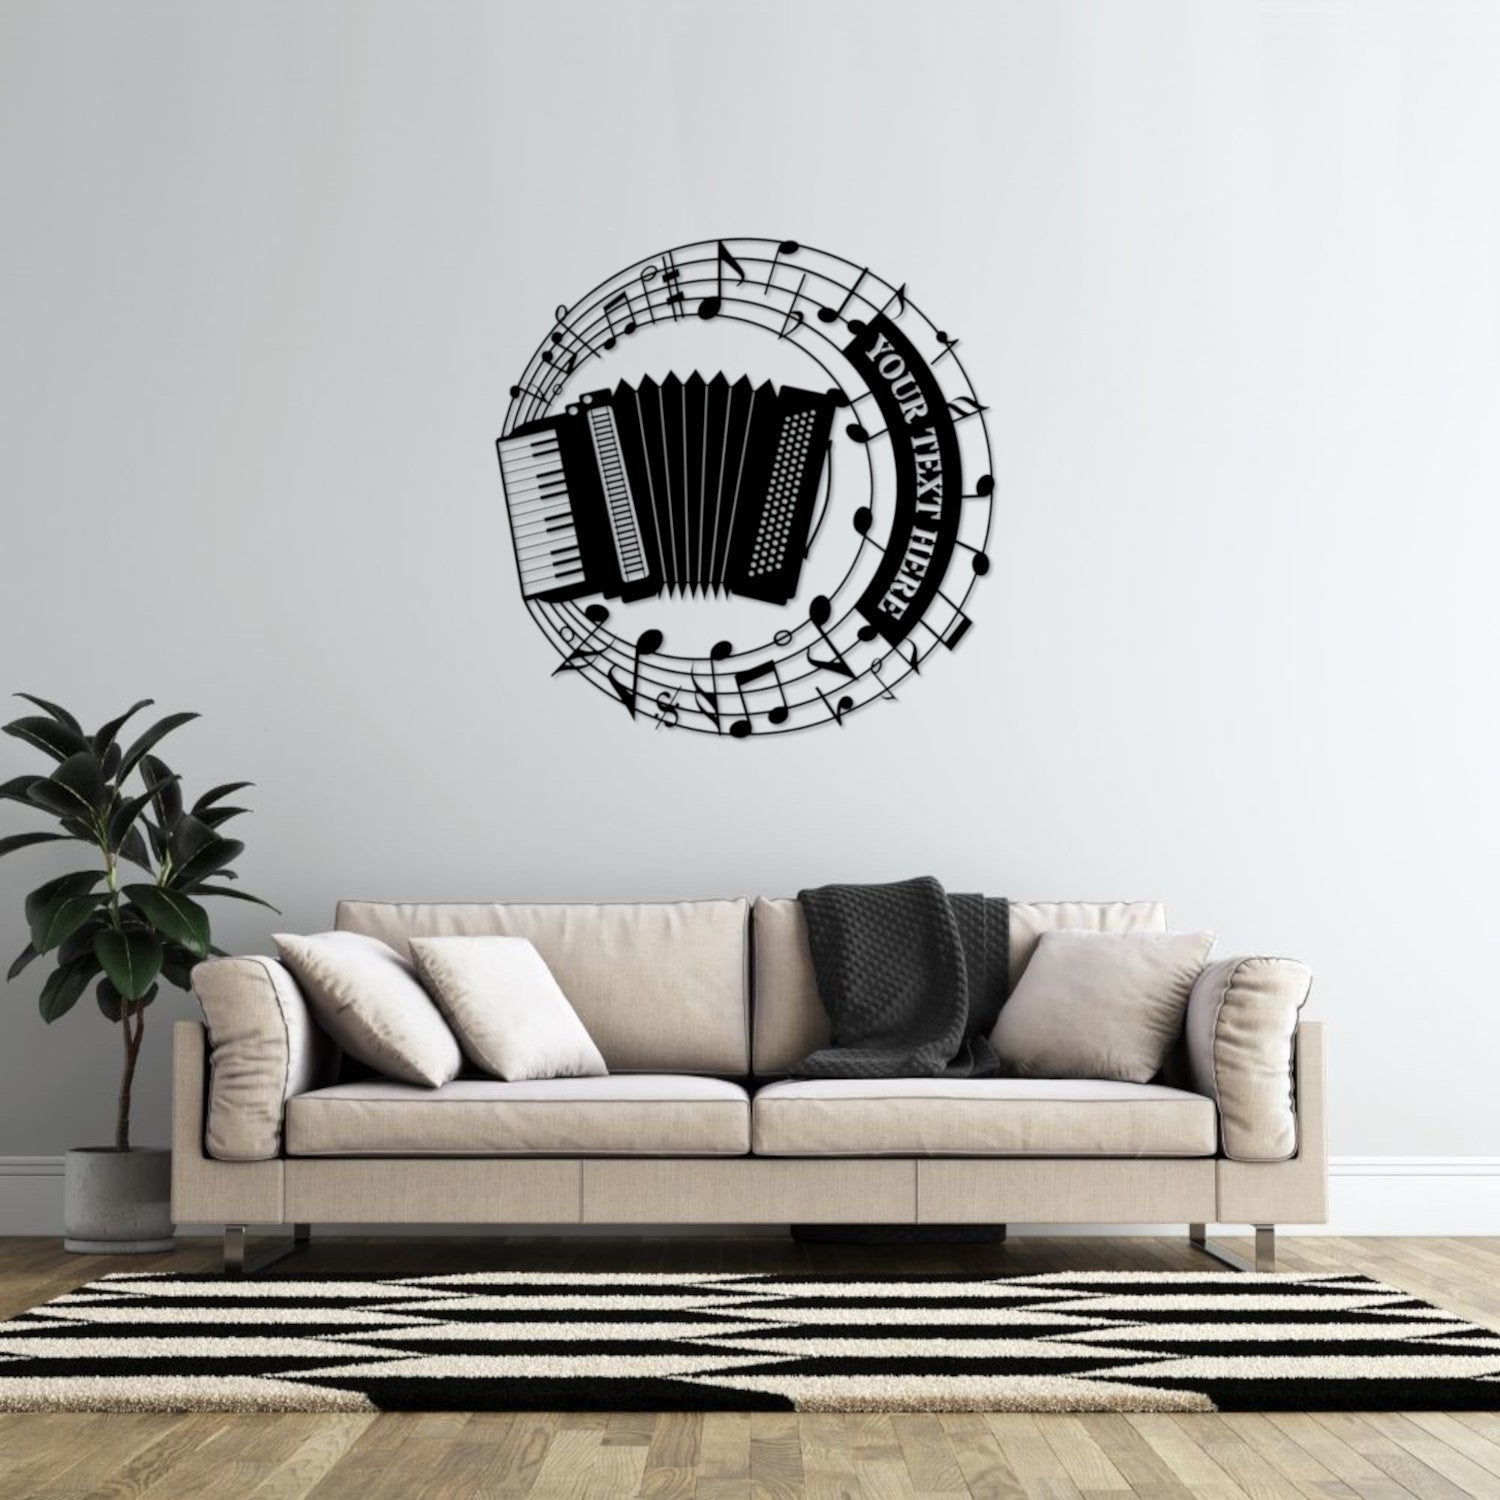 Personalized Accordion Name Metal Sign. Custom Accordion Wall Decor Gift. Accordionis Lover Sign. Musician Entertainer. Musical Wall Hanging